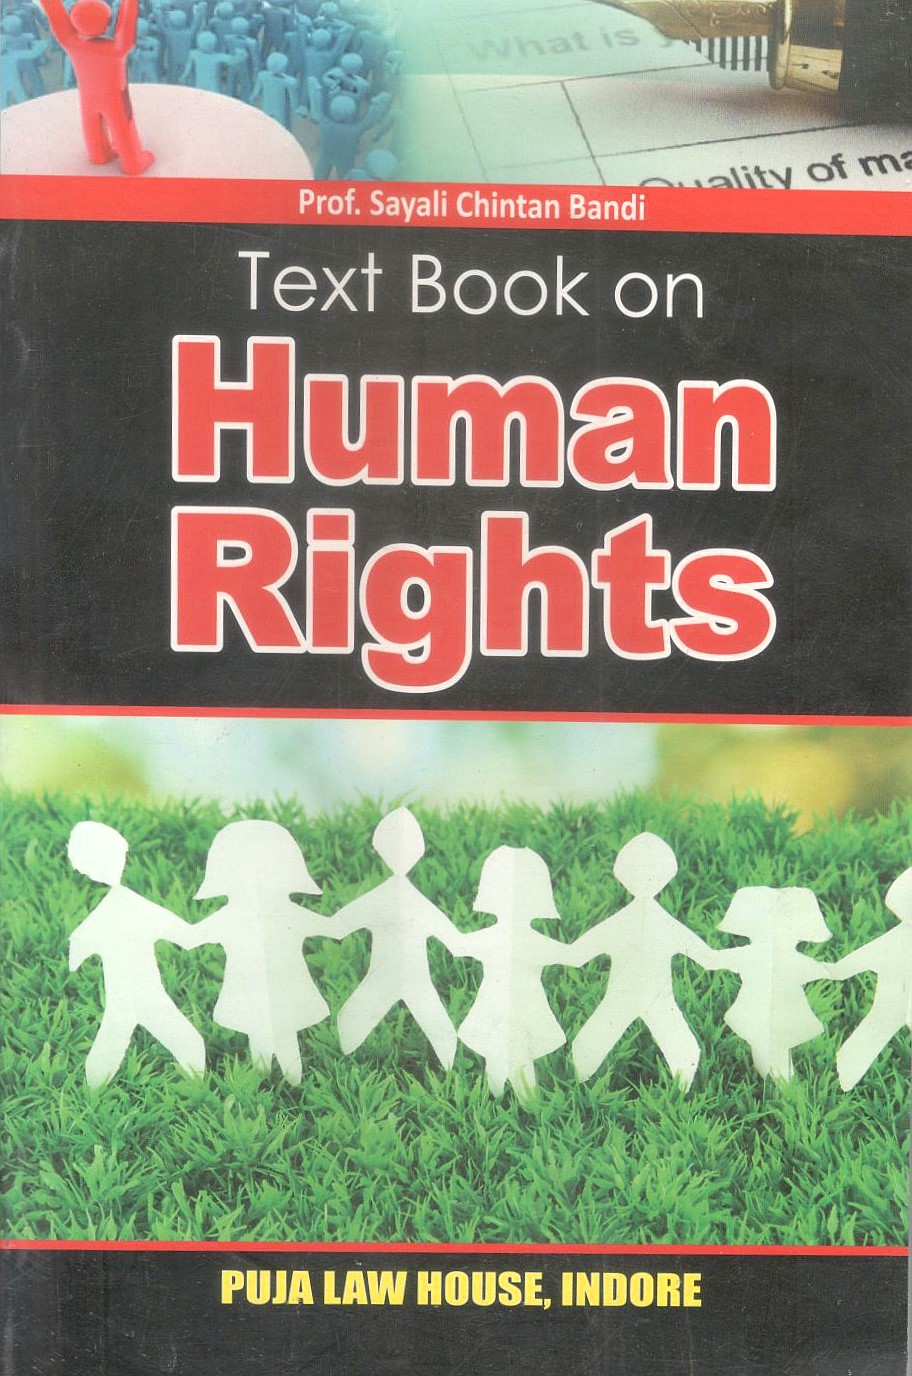  Buy Text book on Human Rights